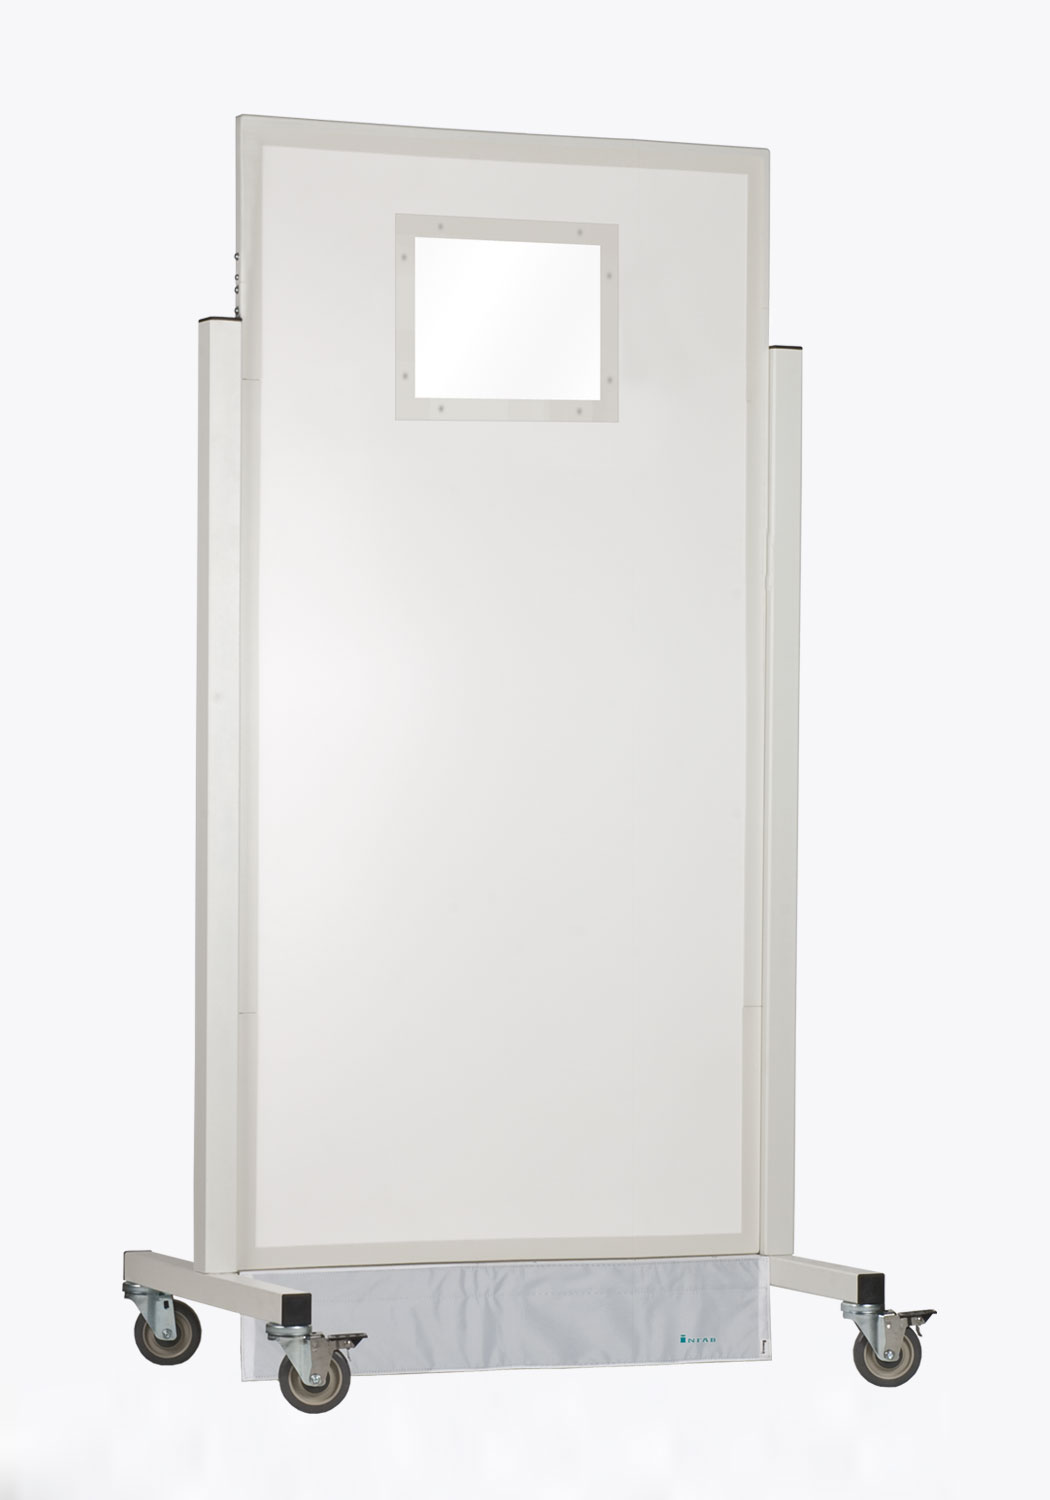 X-ray Mobile Barrier Small Window 683465a